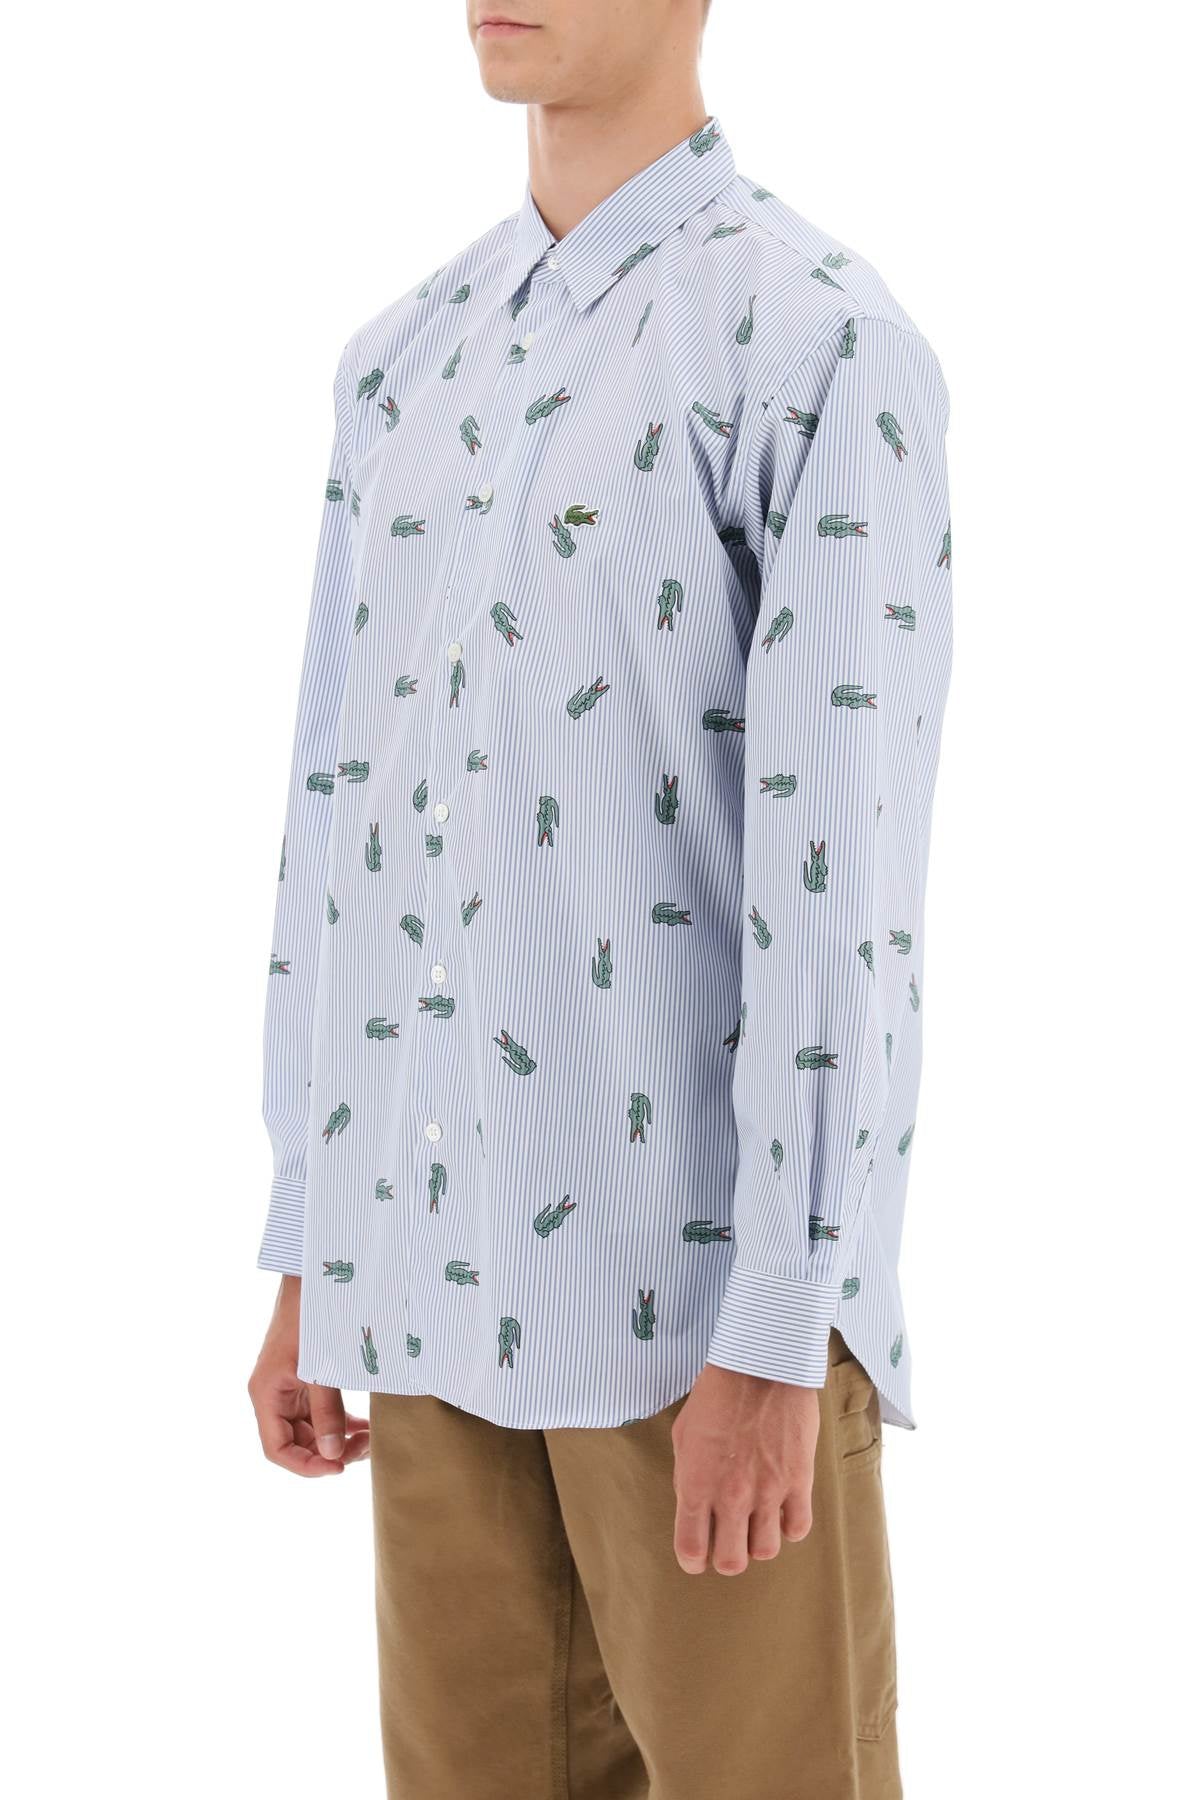 Comme Des Garcons Shirt Comme des garcons shirt x lacoste oxford shirt with crocodile motif